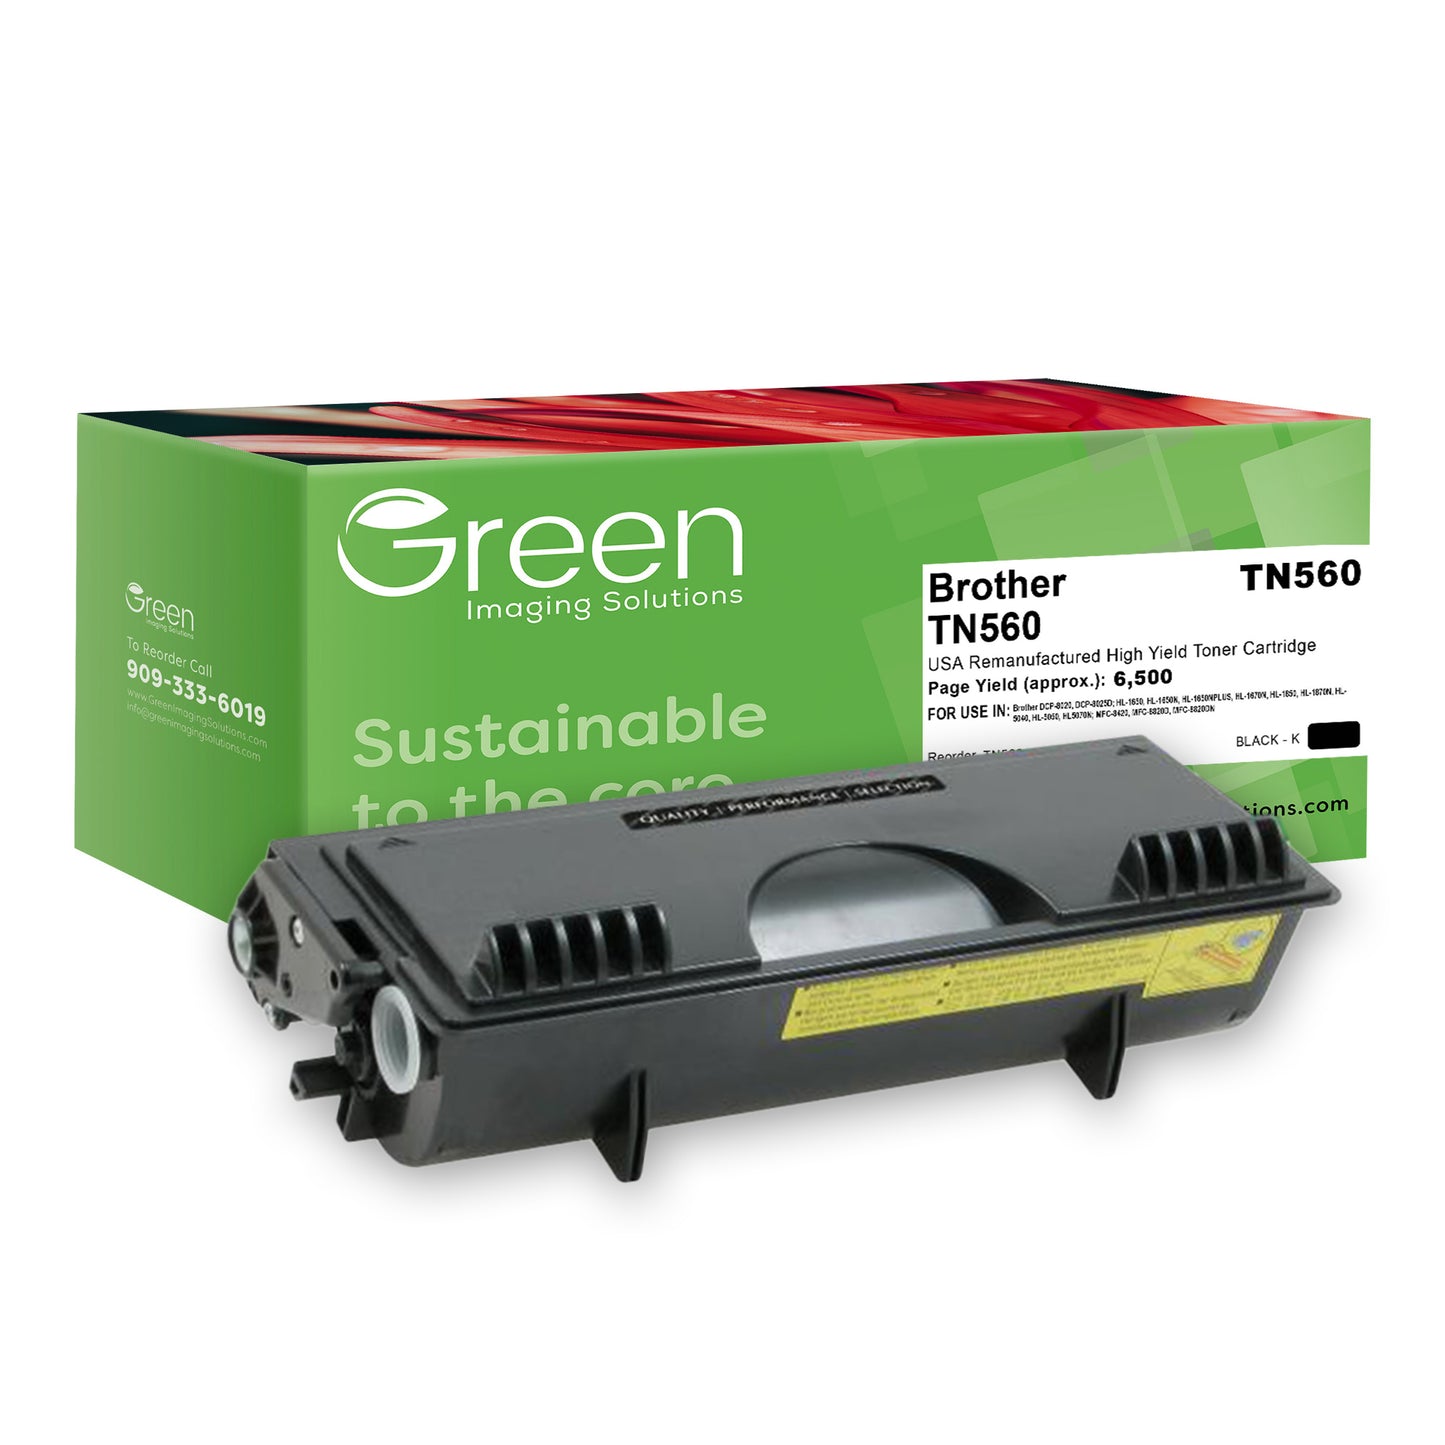 Green Imaging Solutions USA Remanufactured High Yield Toner Cartridge for Brother TN560